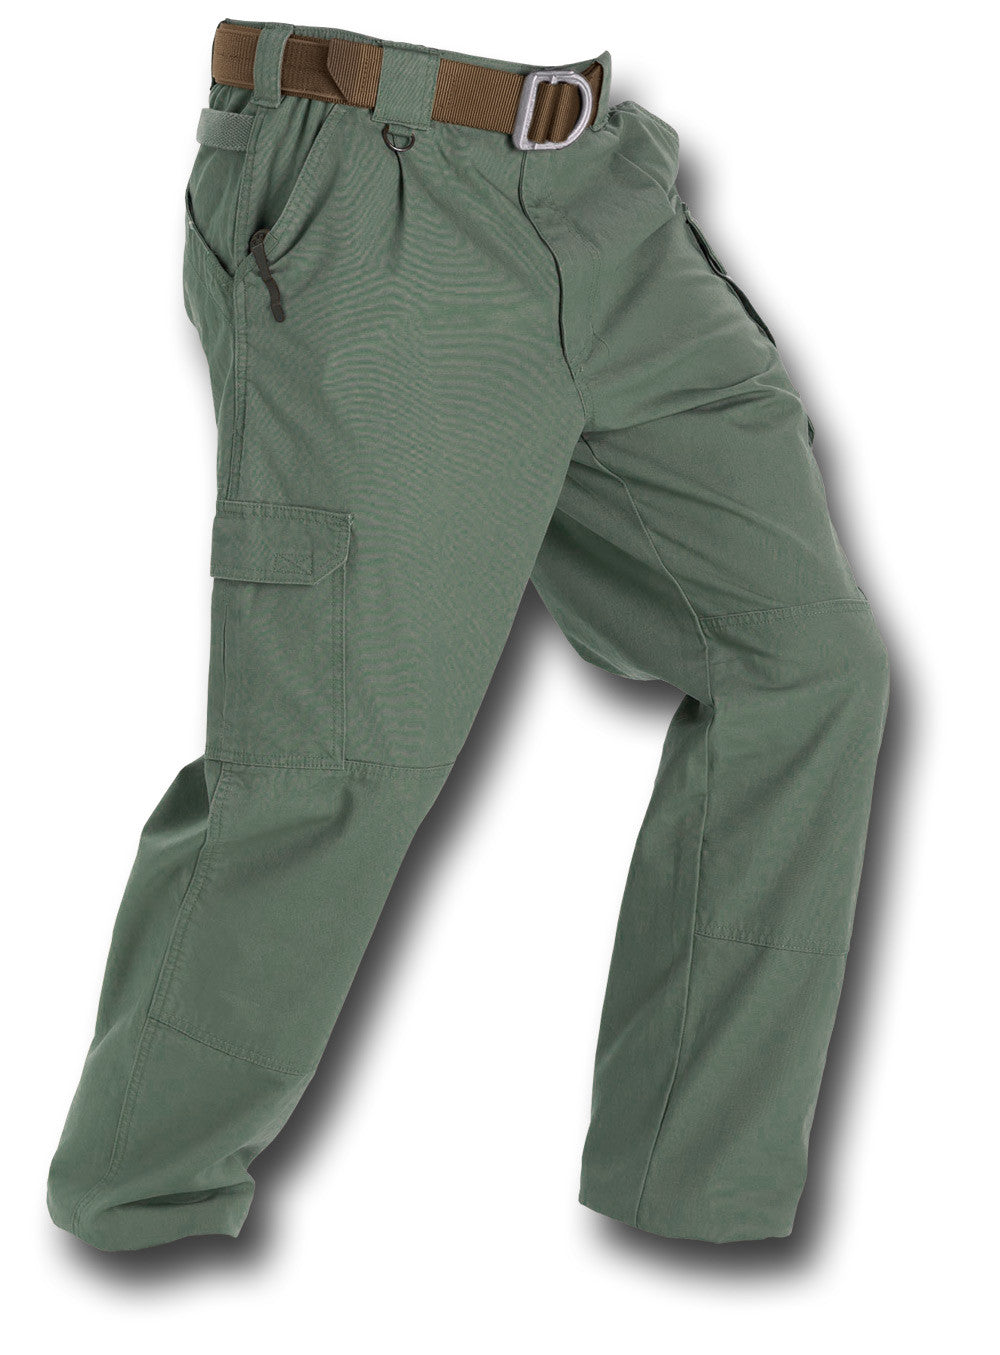 5.11 TACTICAL COTTON TROUSERS